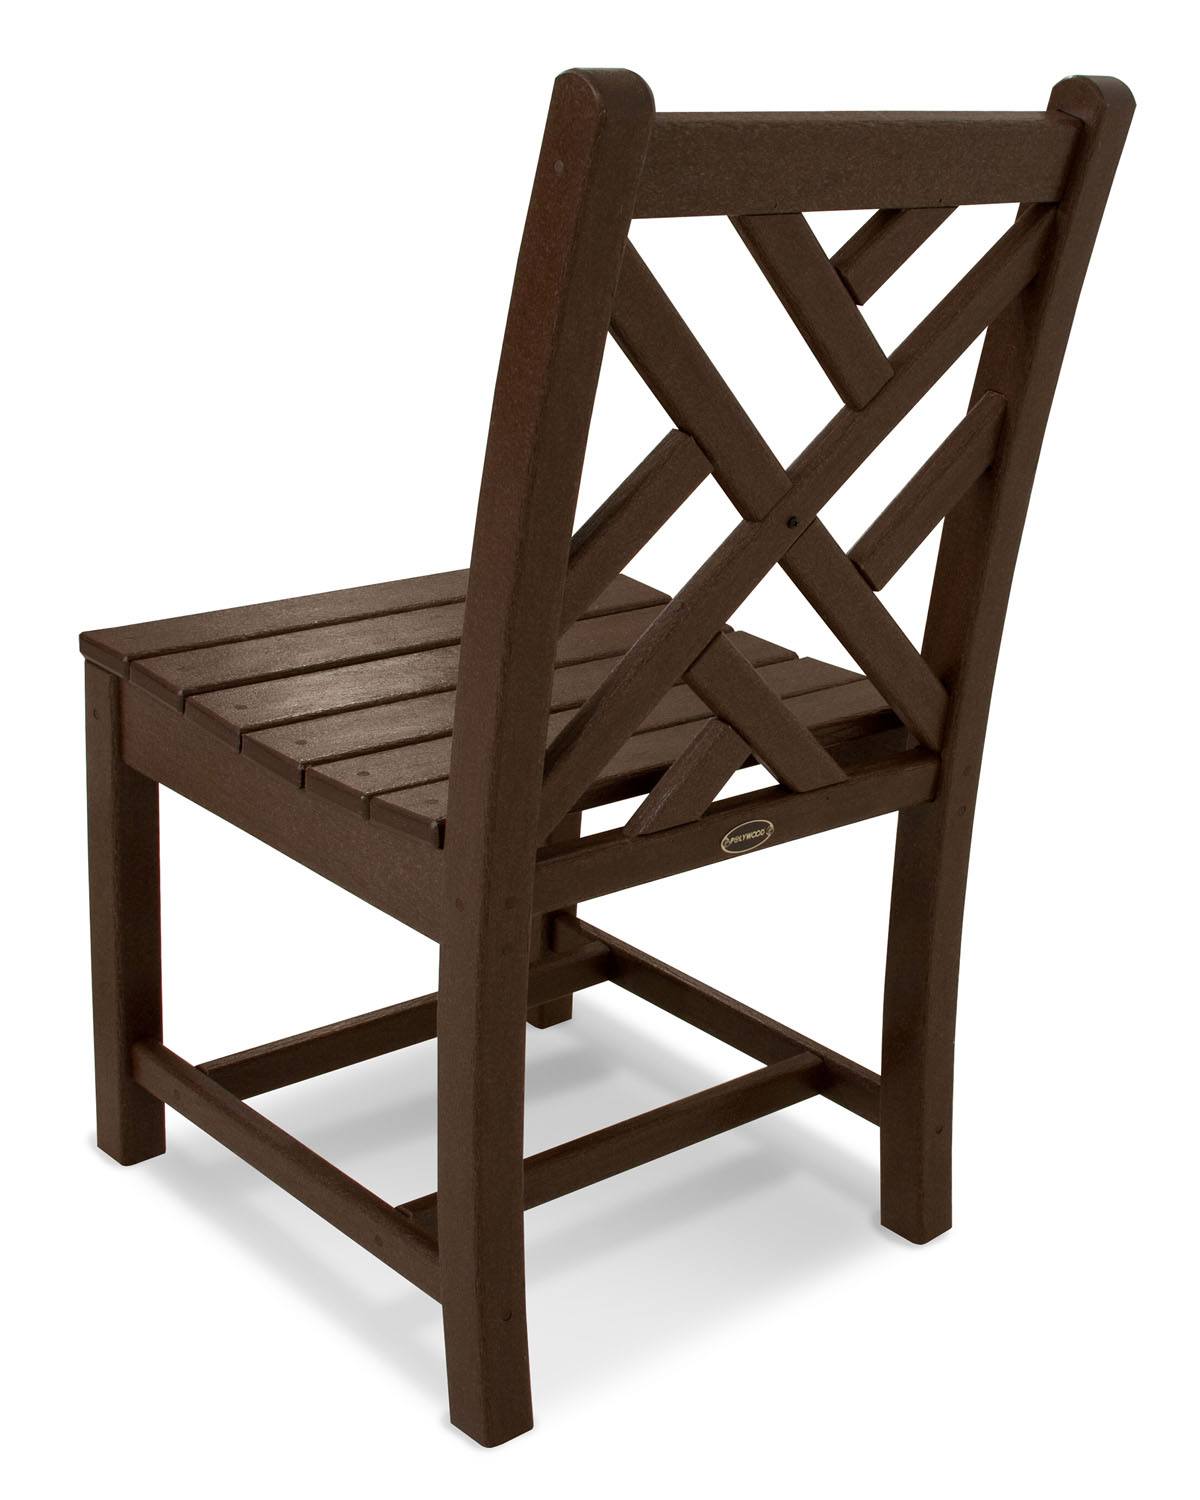 POLYWOOD® Chippendale Dining Side Chair - Mahogany